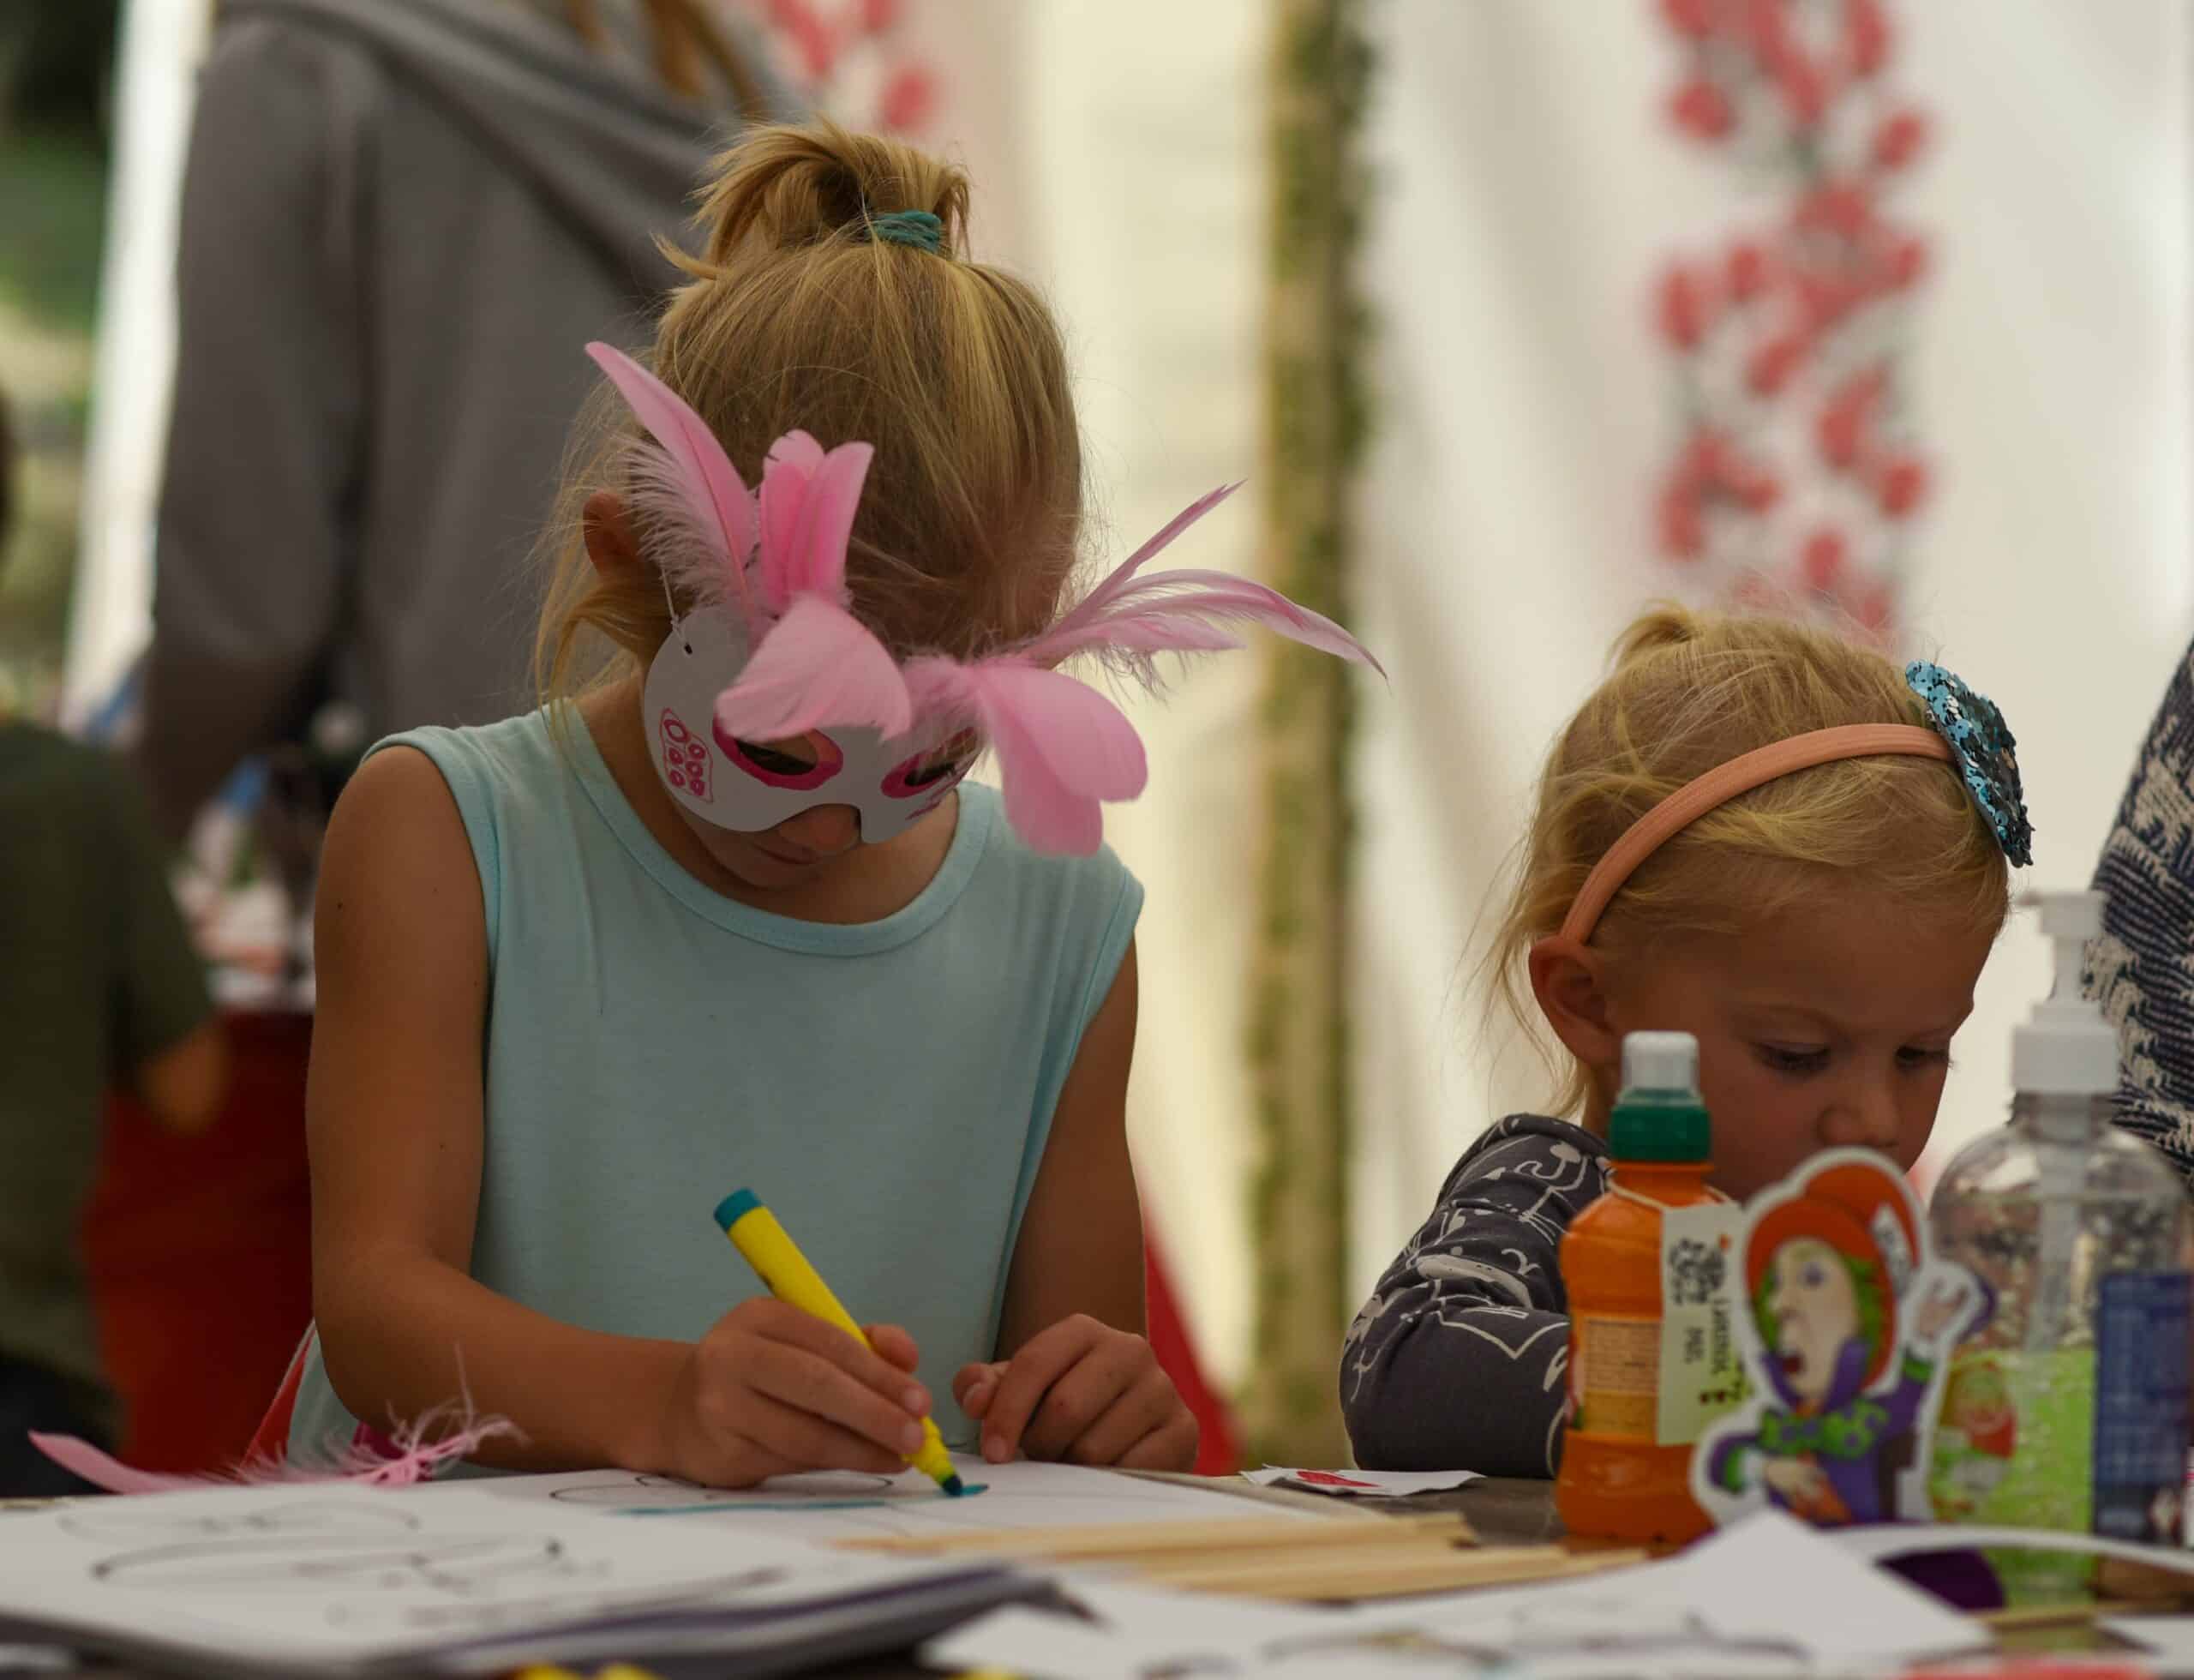 Children doing activities at the festival